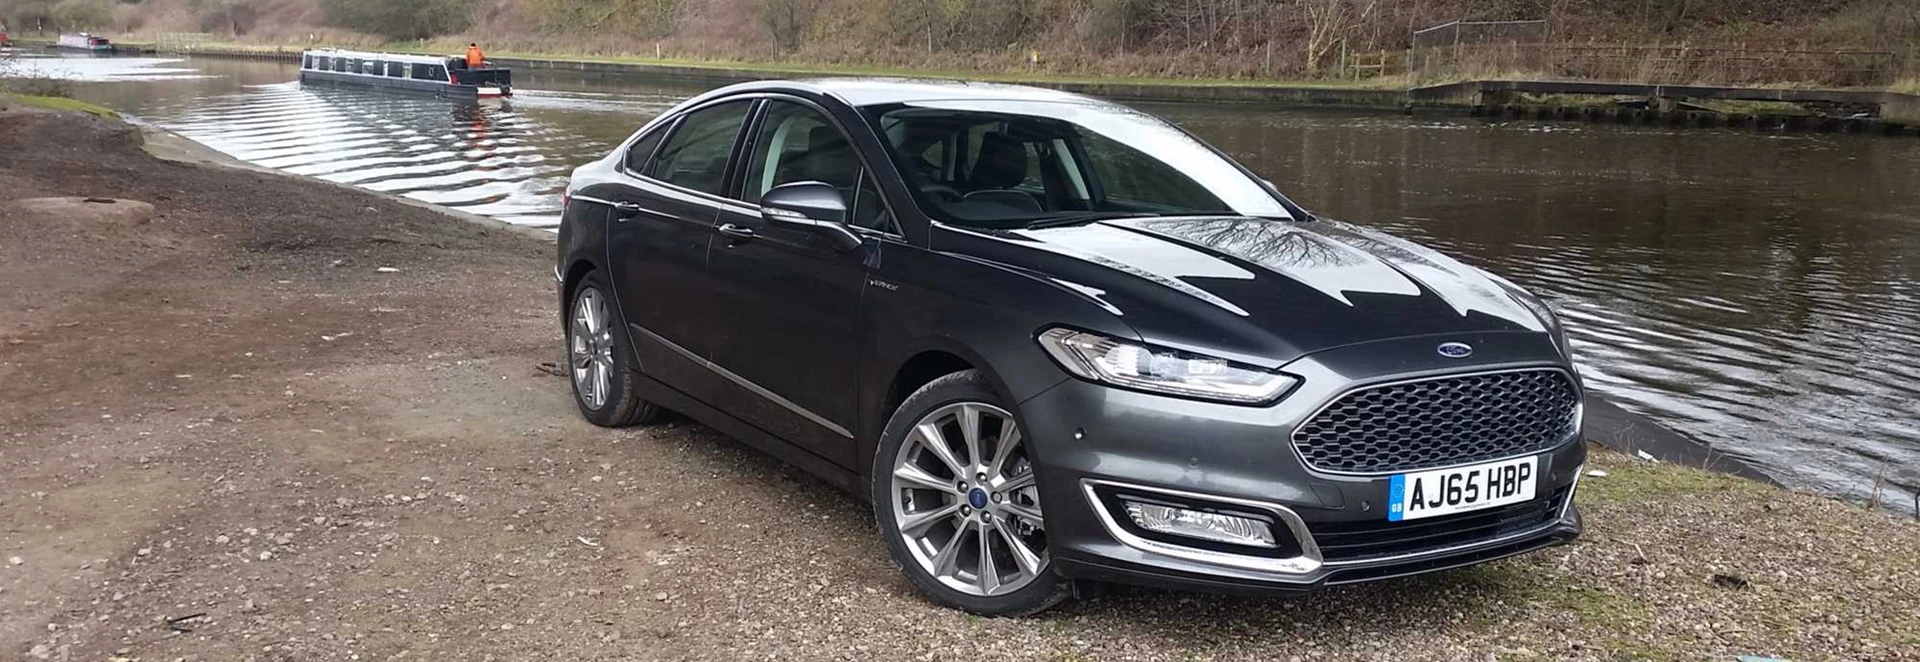 Ford Mondeo Vignale saloon review 